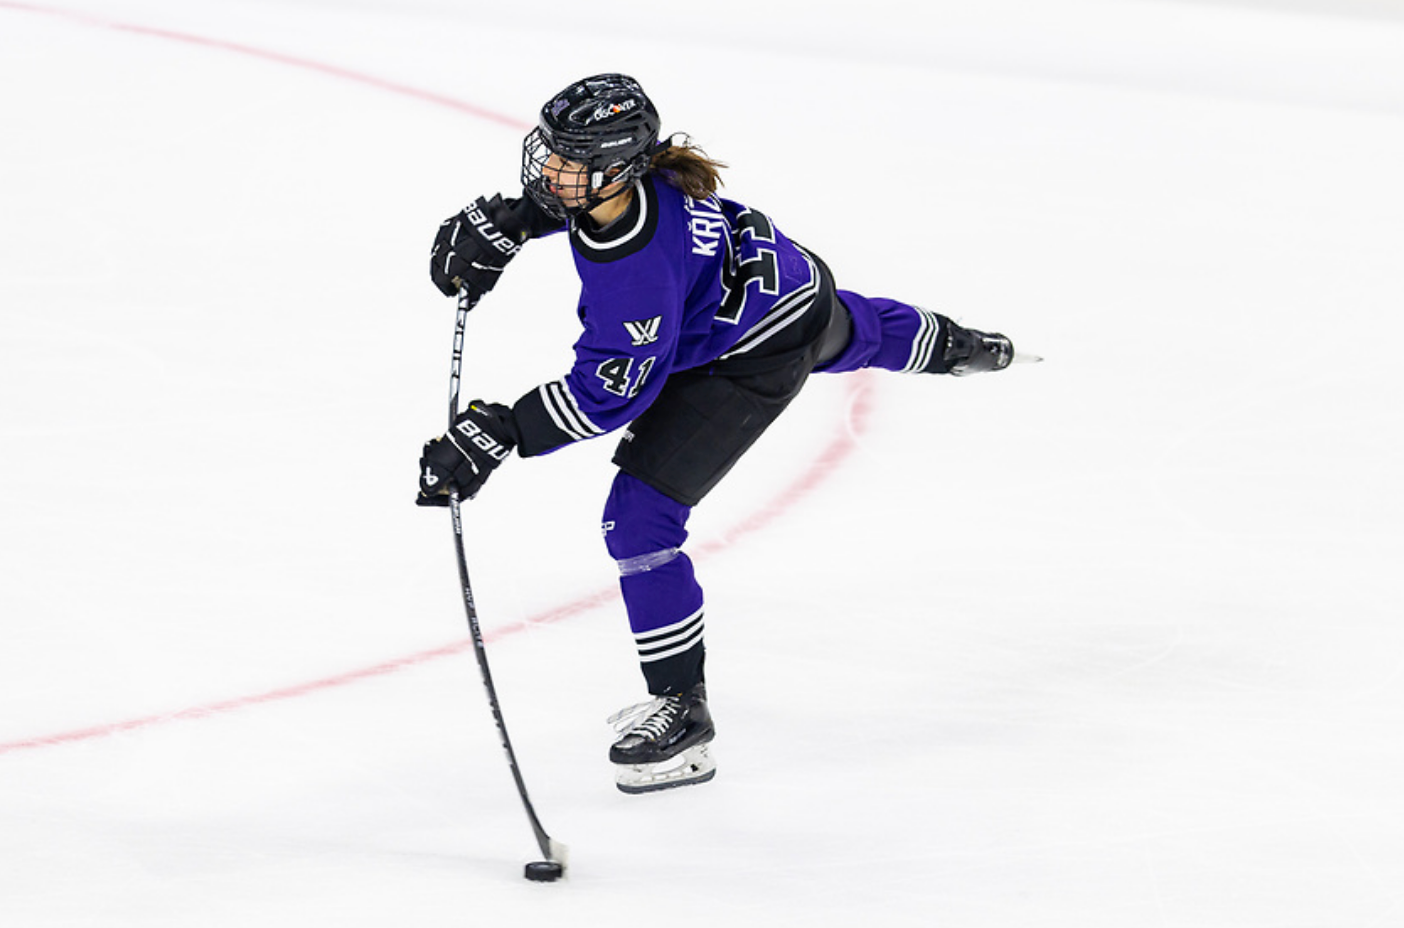 Denisa Křížová transfers all her weight to her front foot while flexing her stick. She is about to take a shot. She is wearing a purple home uniform.